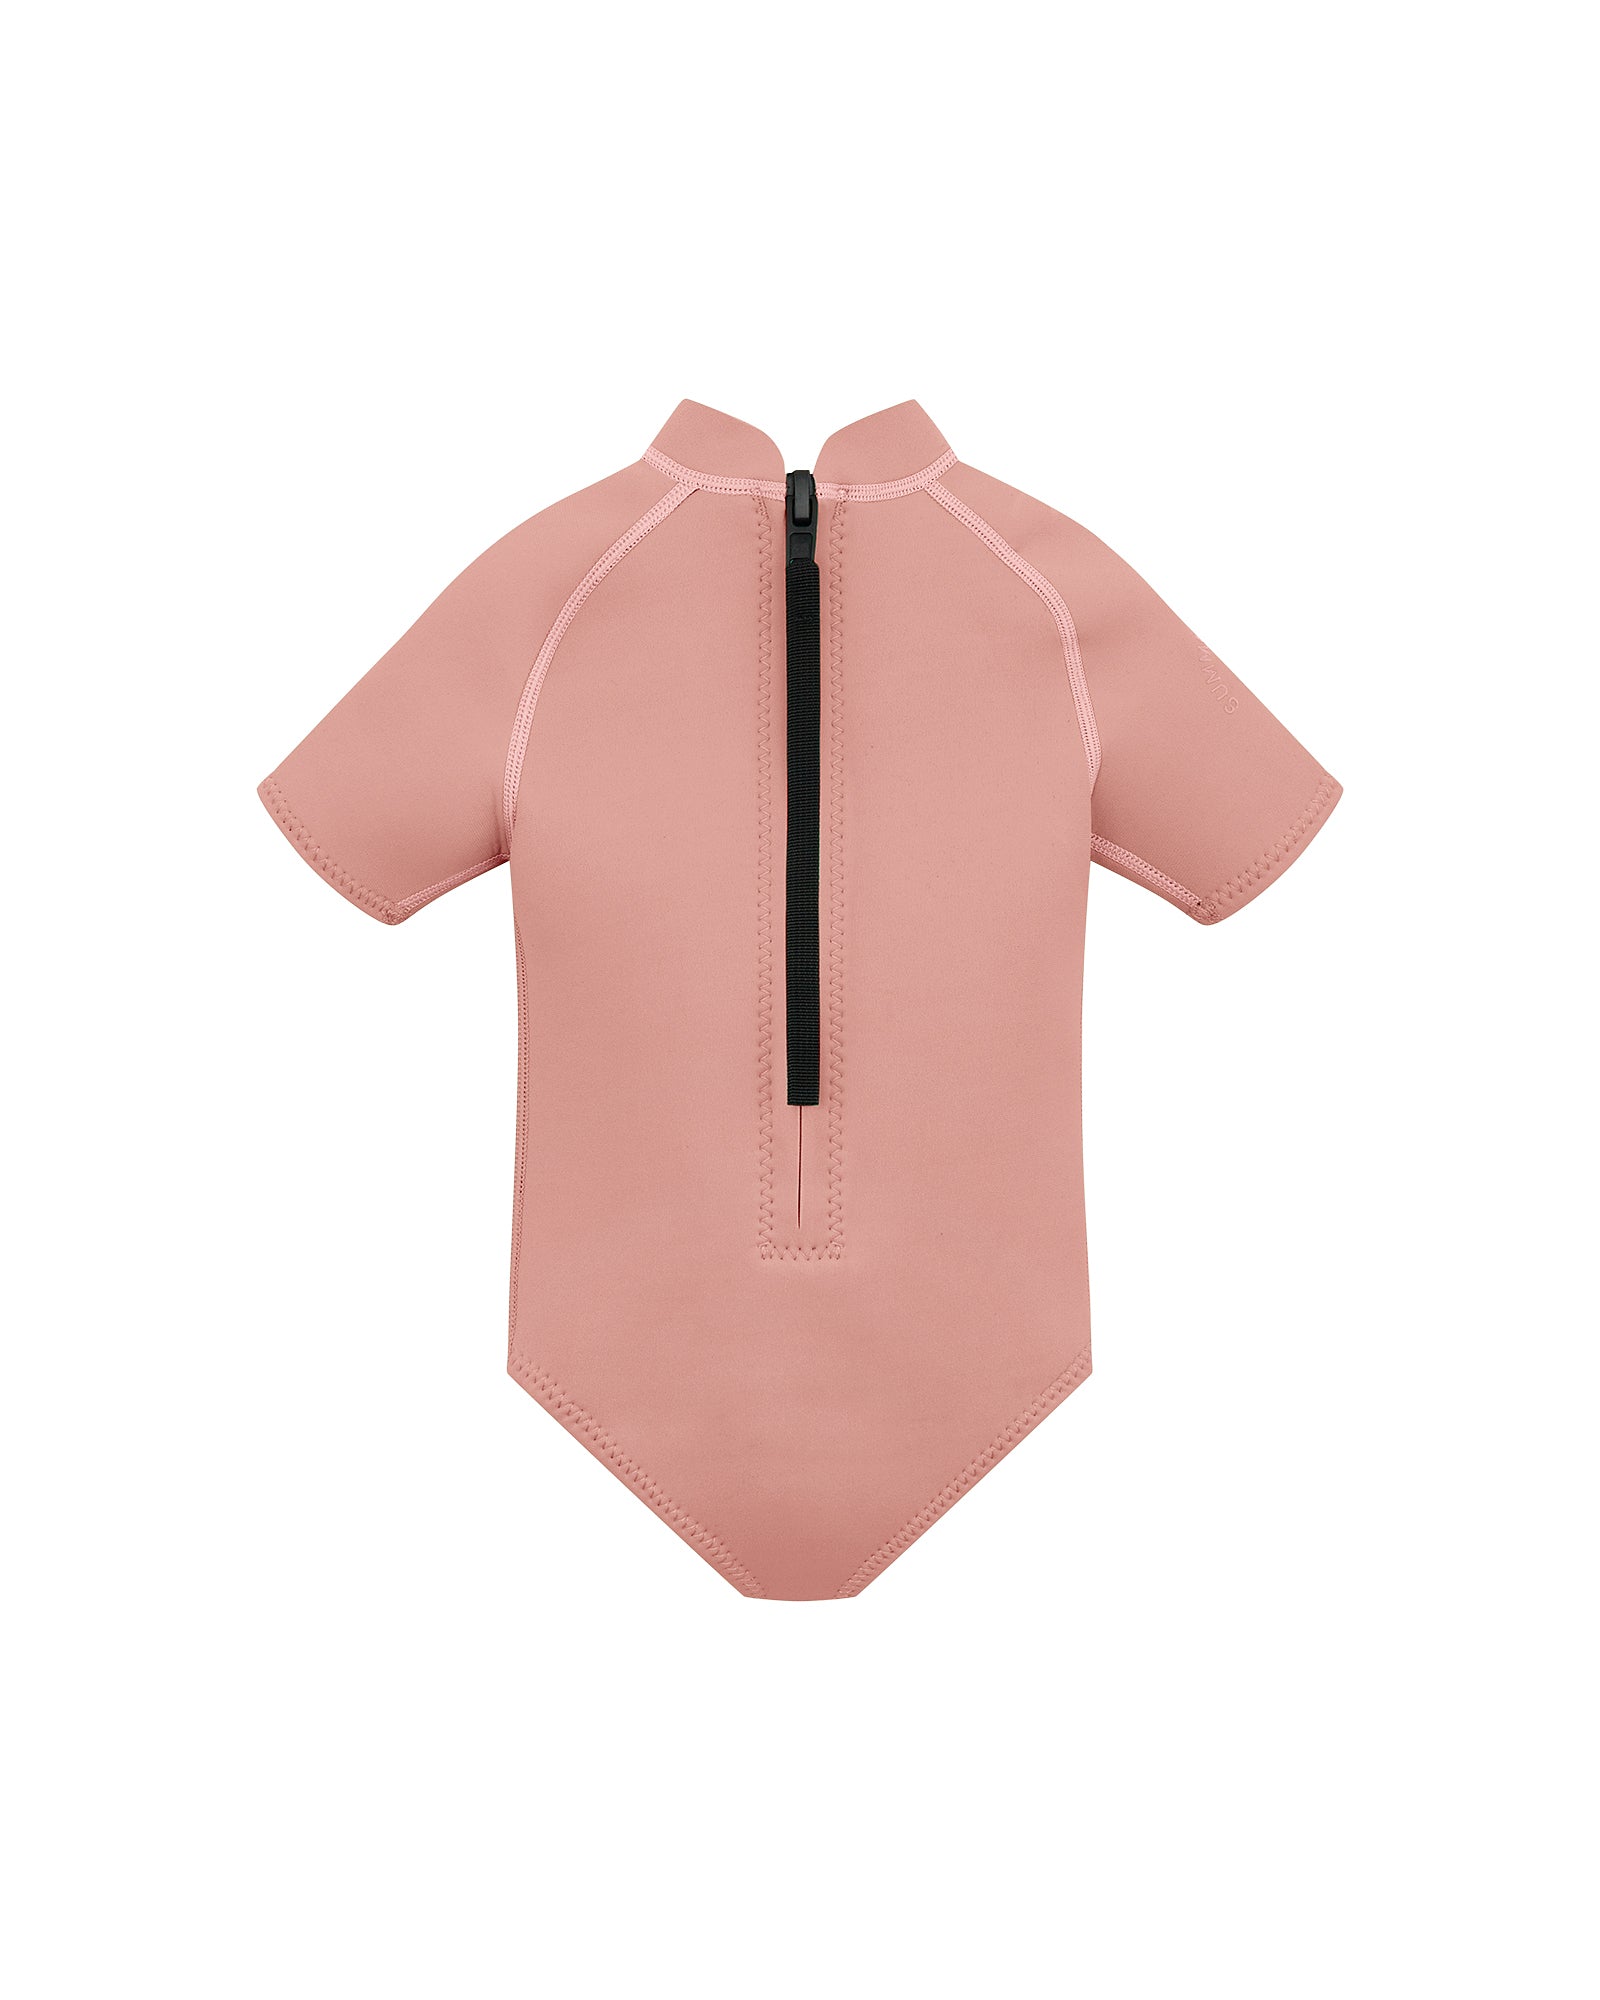 Short Sleeve Paddle Suit - Dusty Pink